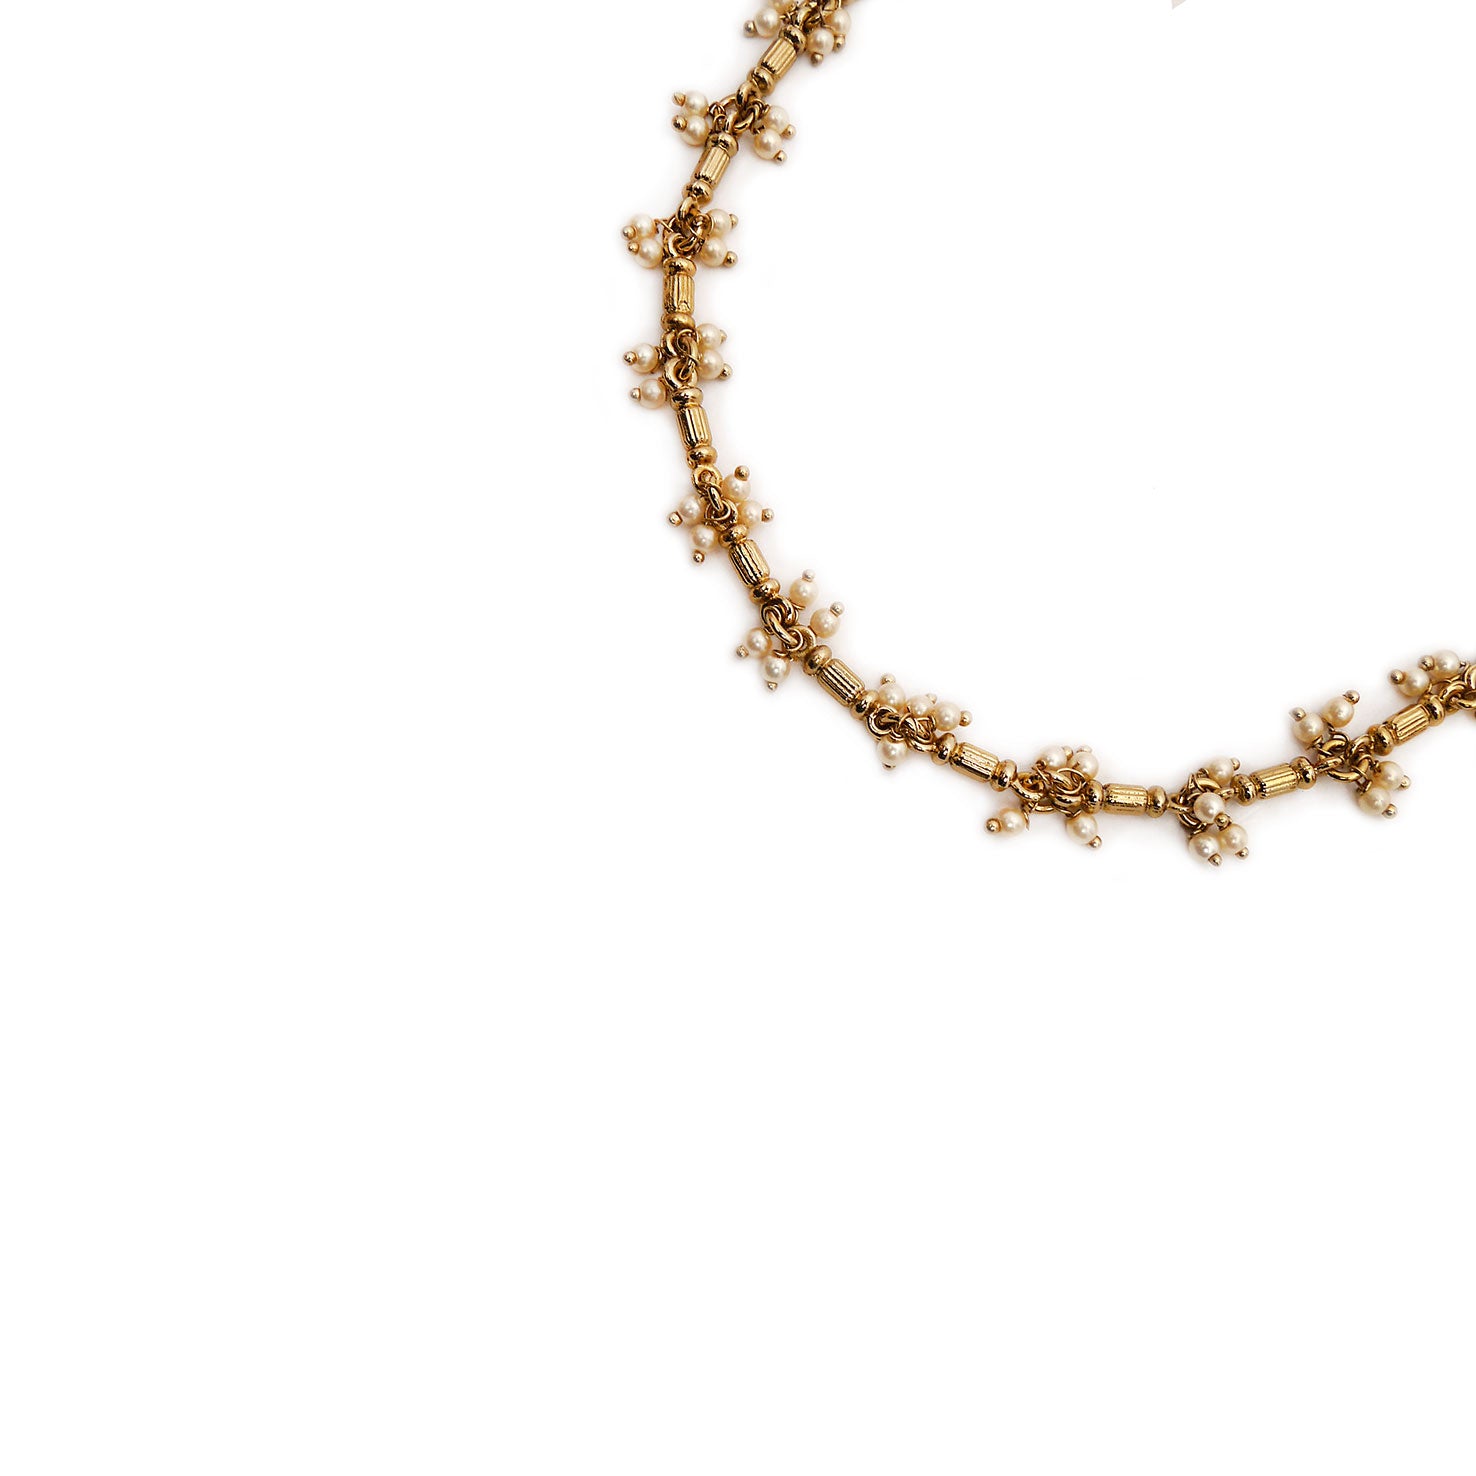 Kalki Anklet in Pearl and Antique Gold